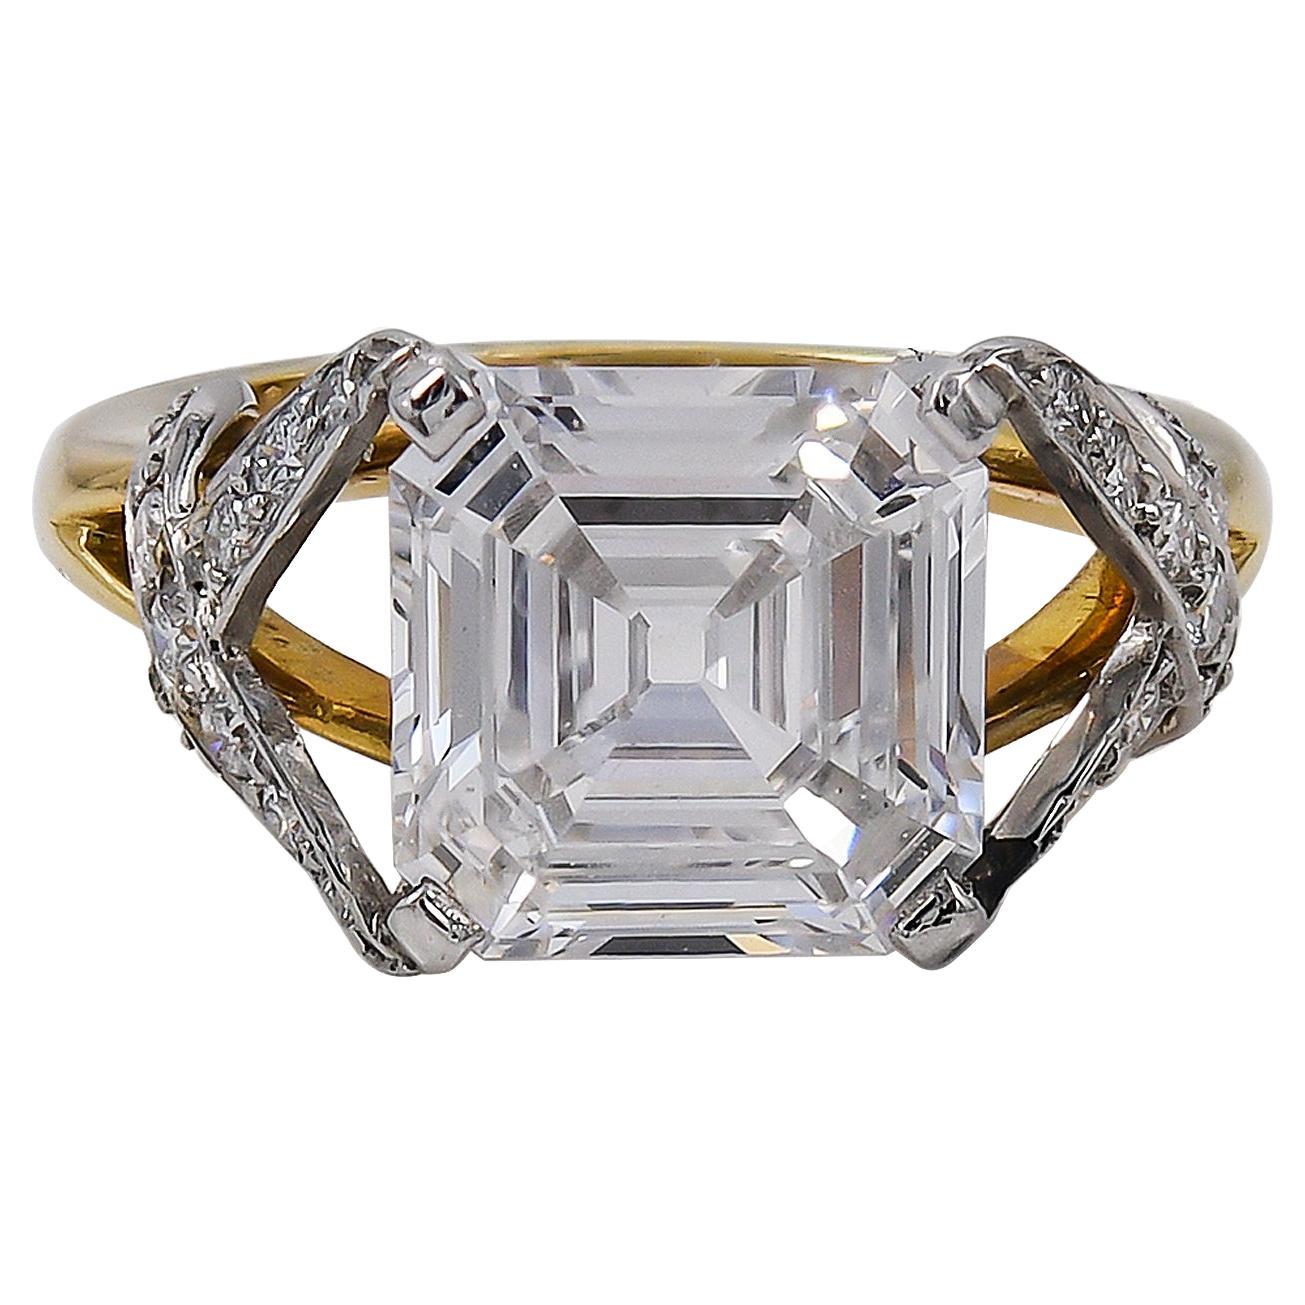 Tiffany & Co. Schlumberger GIA Certified 3.92 Carat E Color Diamond Ring For Sale